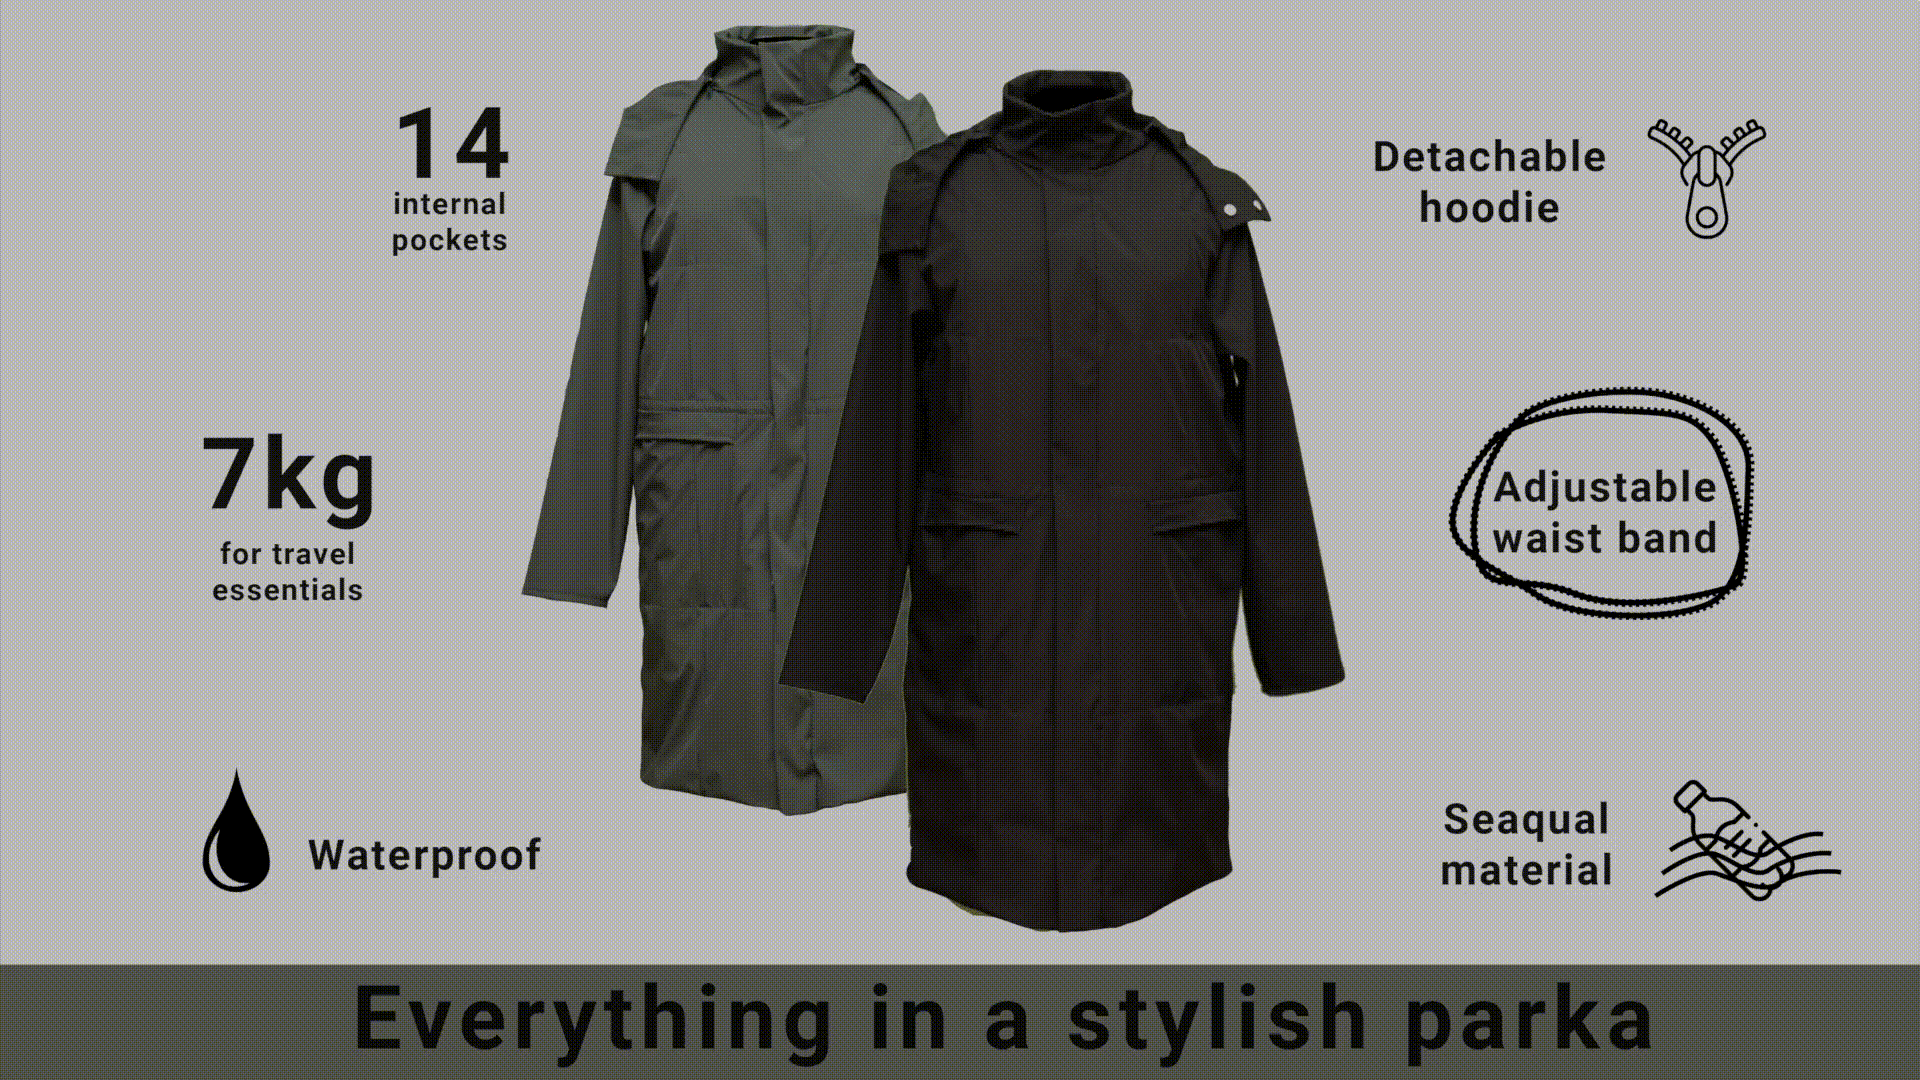 Everything in a stylish parka: 14 internal pockets, 7k for travel essentials.